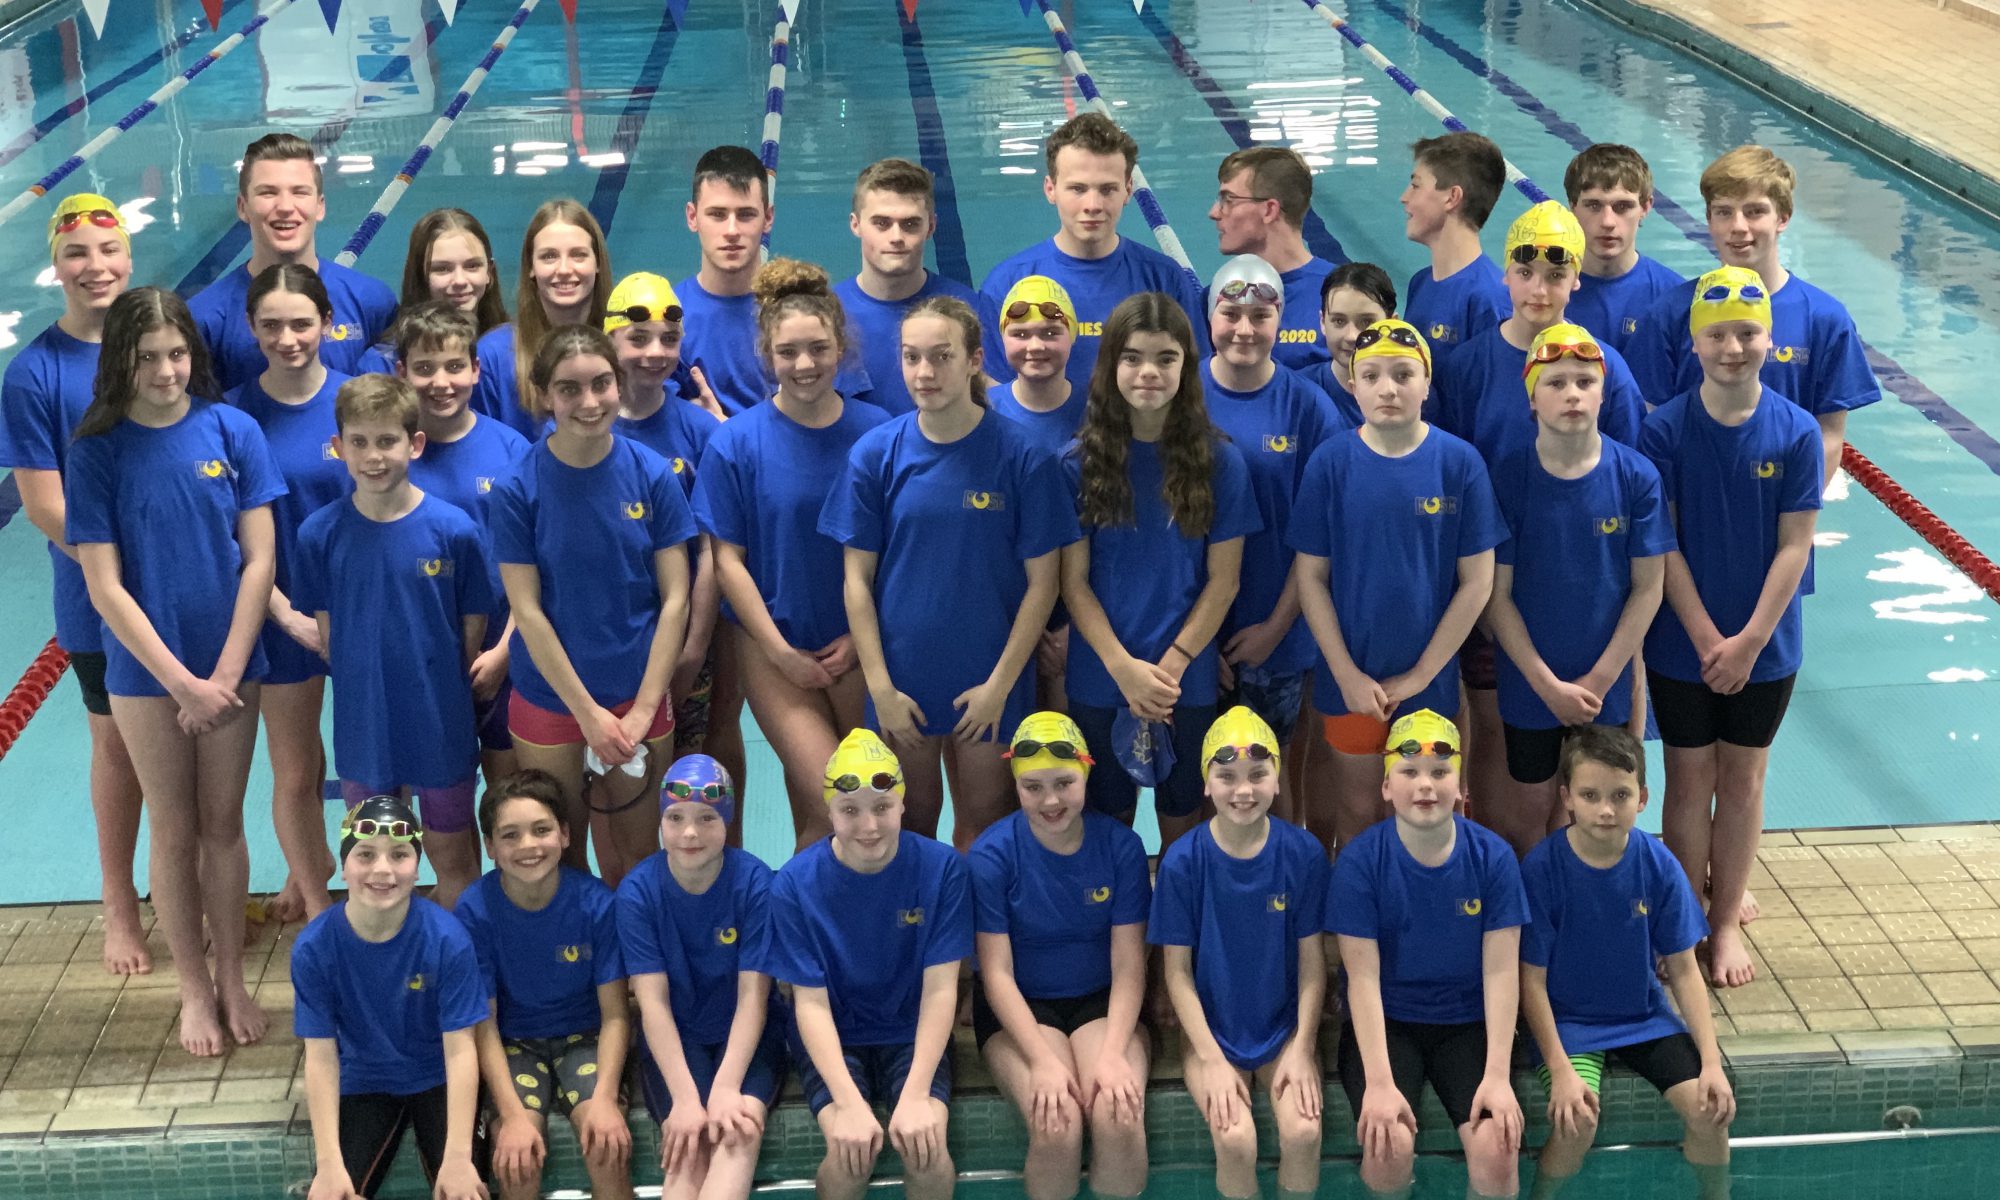 Diss Otters Make Waves at County Championships | Diss Otters